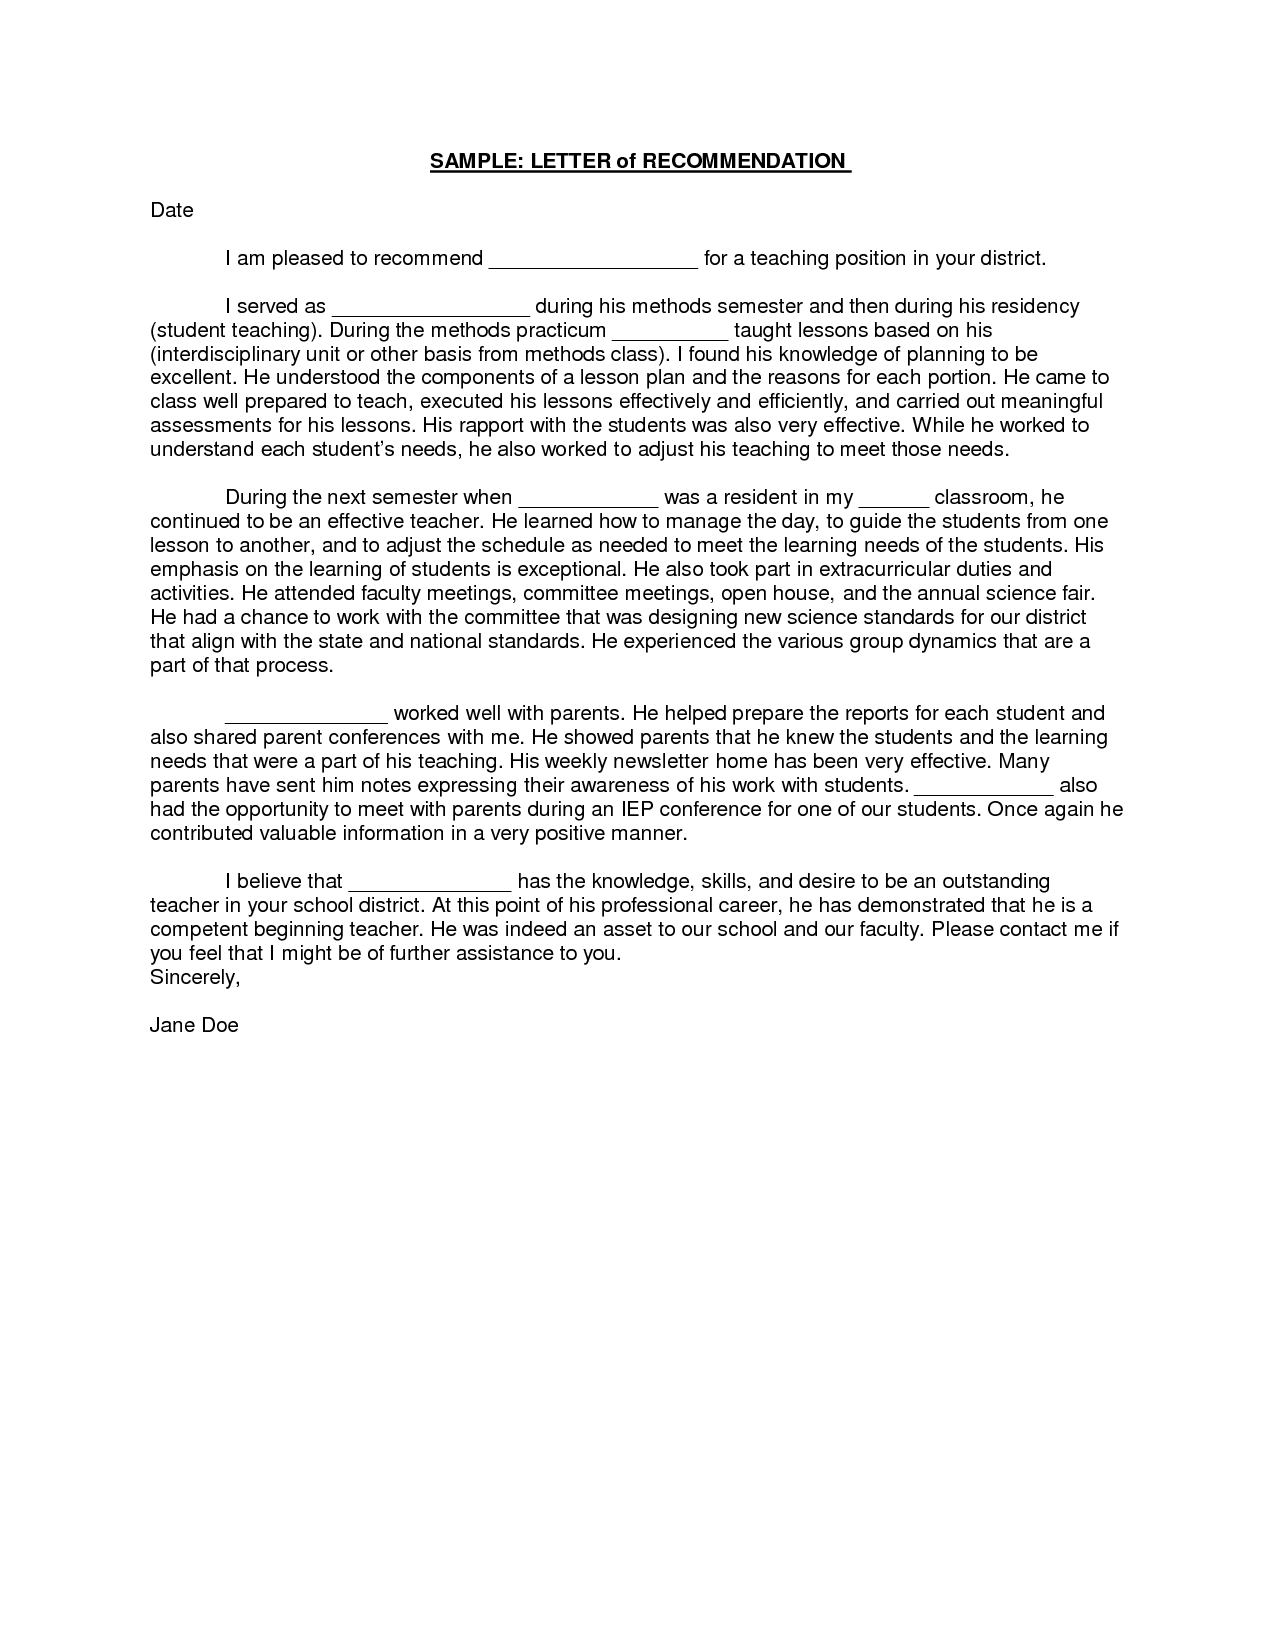 New Sample Of Letter Of Recommendation For Job Teacher in size 1275 X 1650